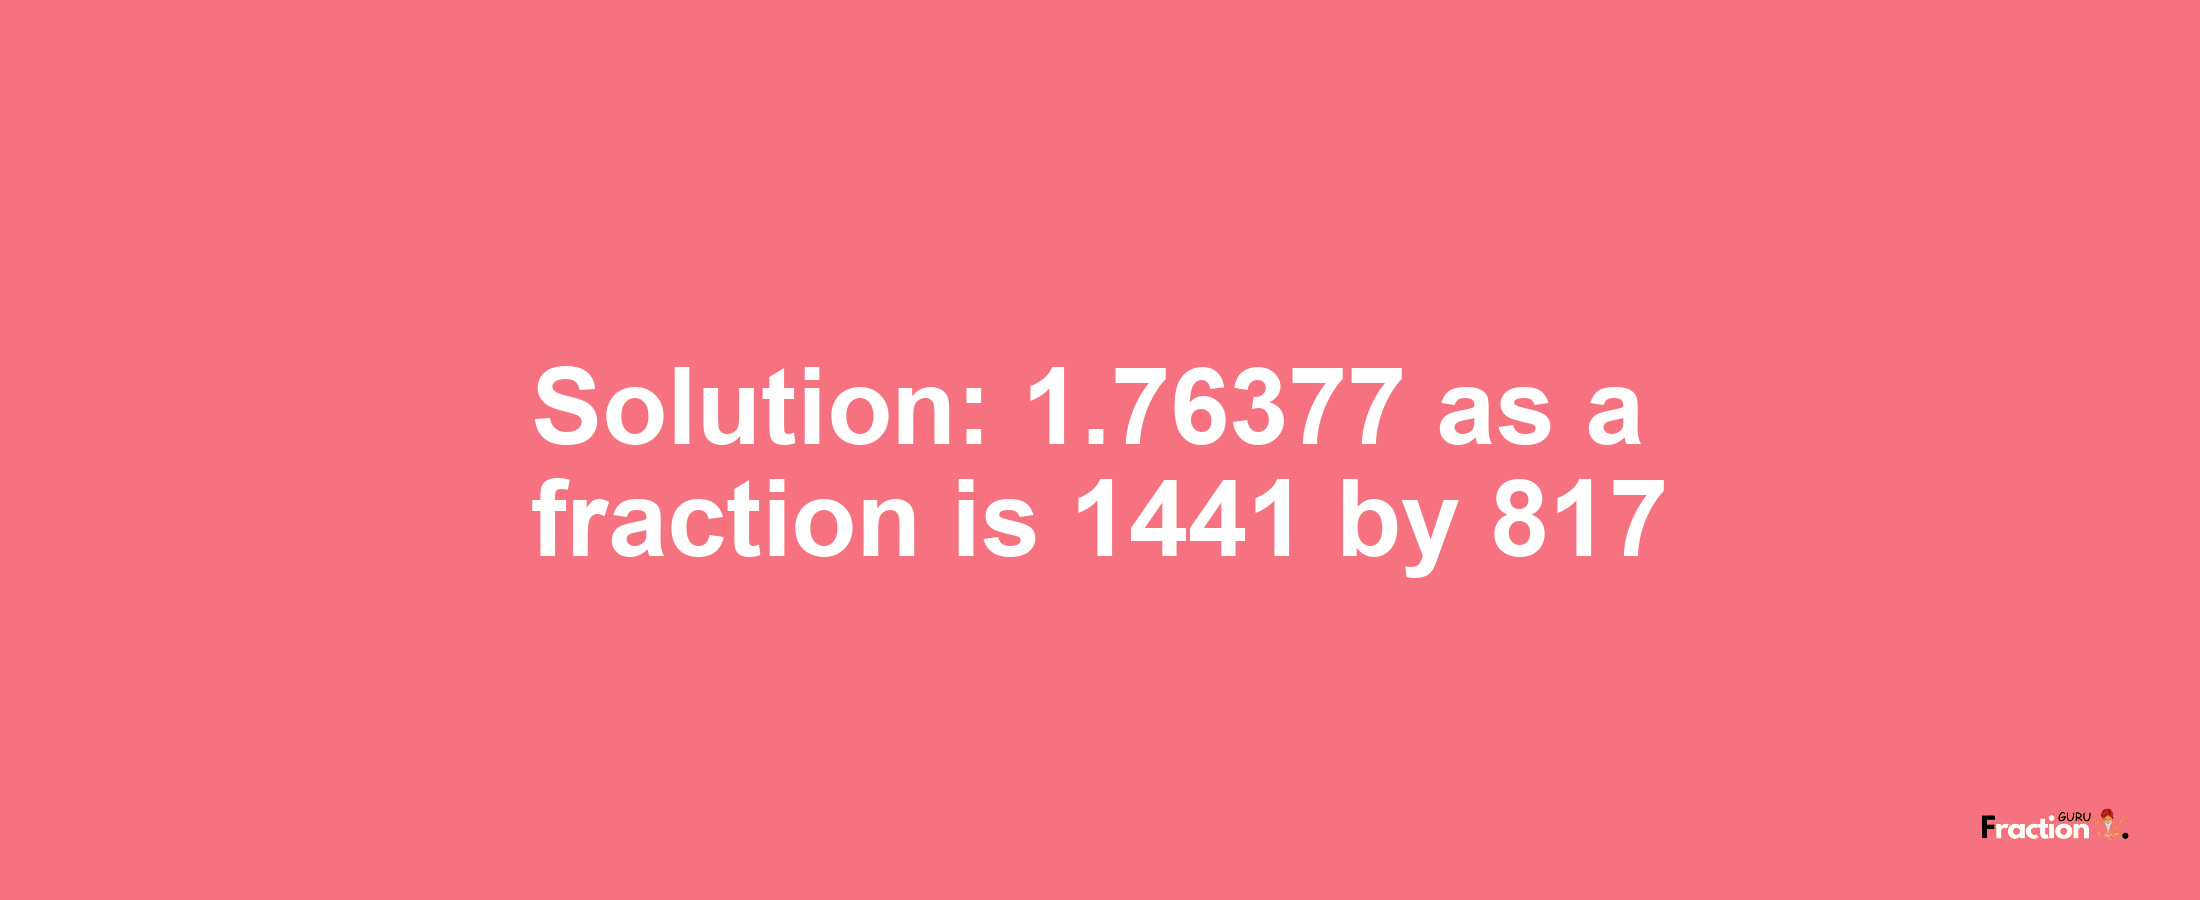 Solution:1.76377 as a fraction is 1441/817